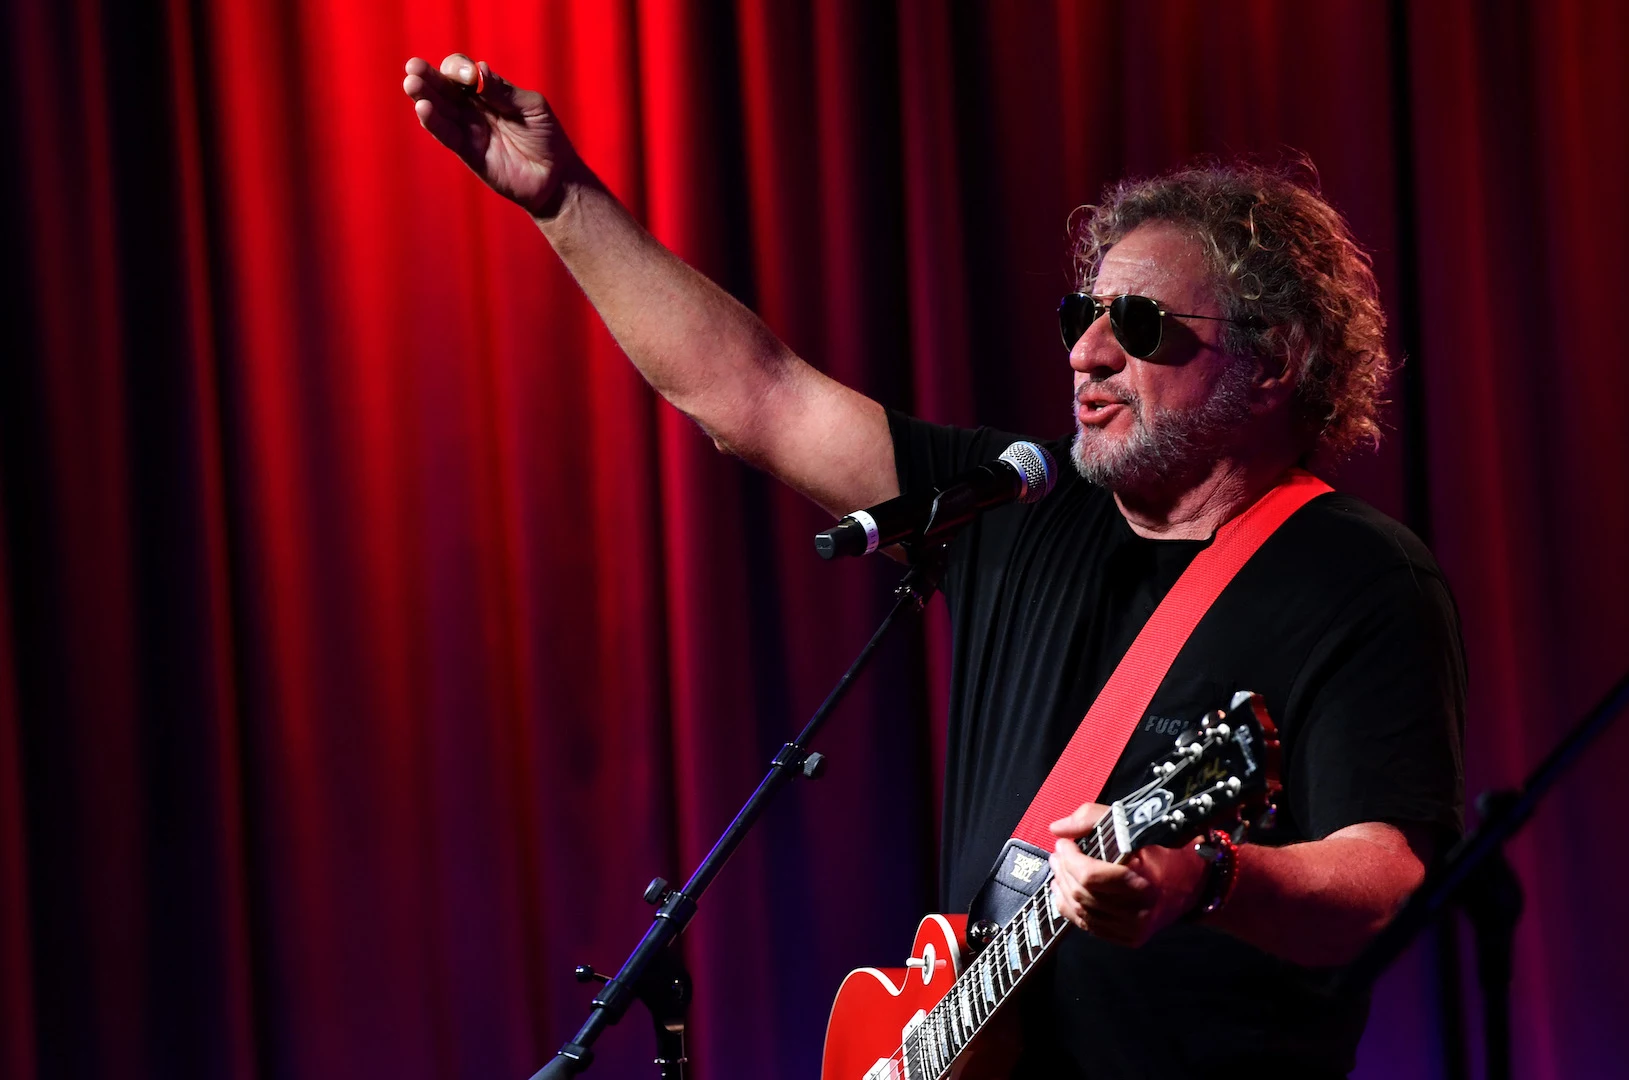 74-Year-Old Sammy Hagar Shares His Secret On How To Not Grow Old